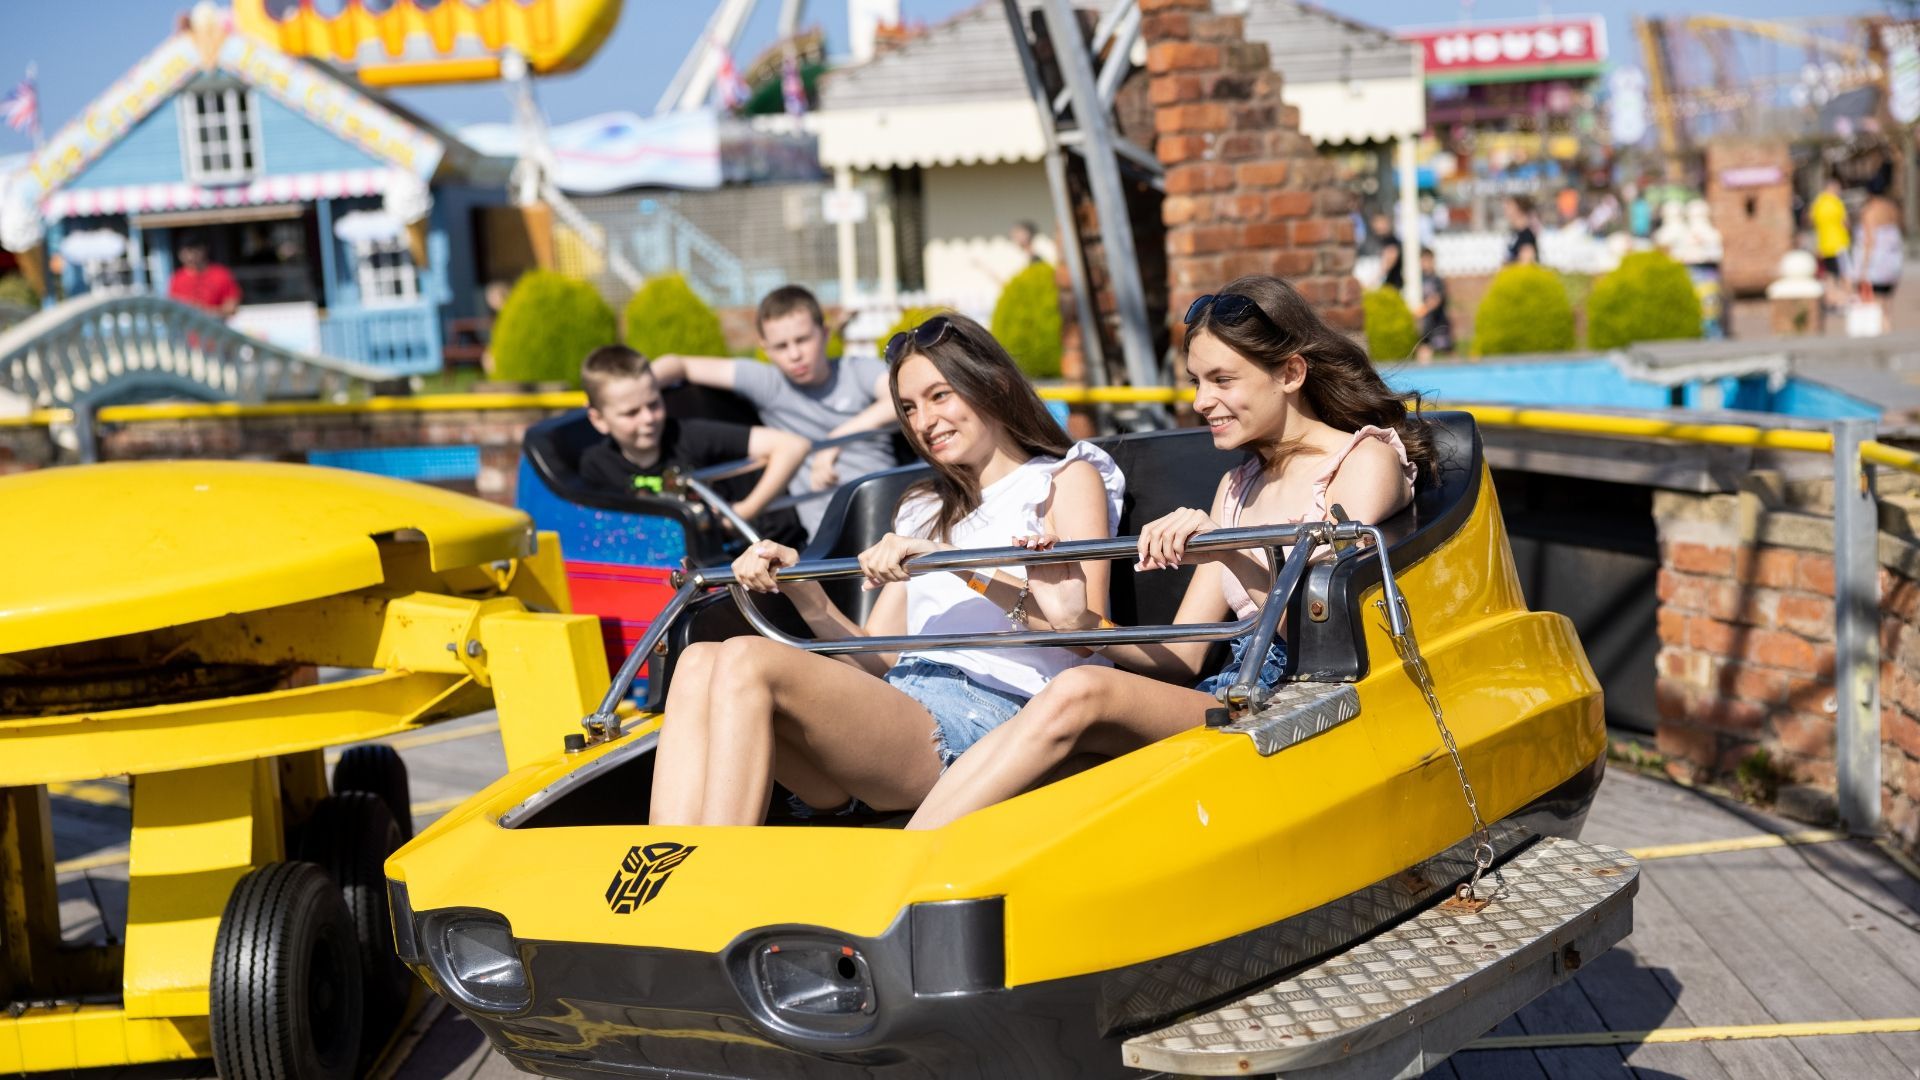 Want to enjoy theme park thrills but avoid fast and intense rides? Check out our best rides 